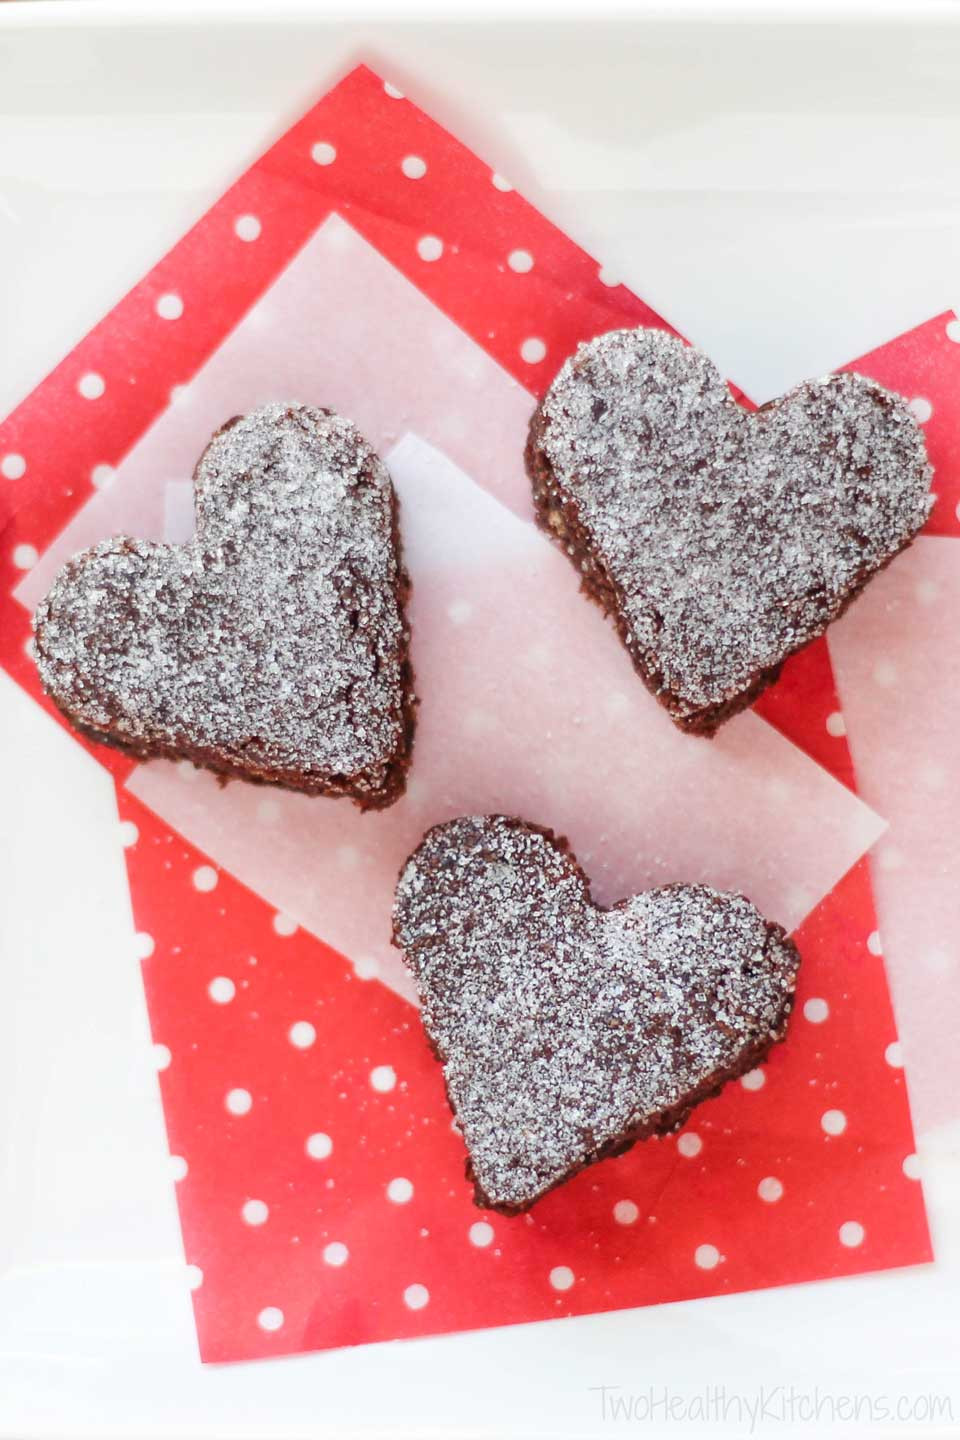 Healthy Valentines Day Snacks
 Easy Healthy Valentine s Day Treats and Snacks Two